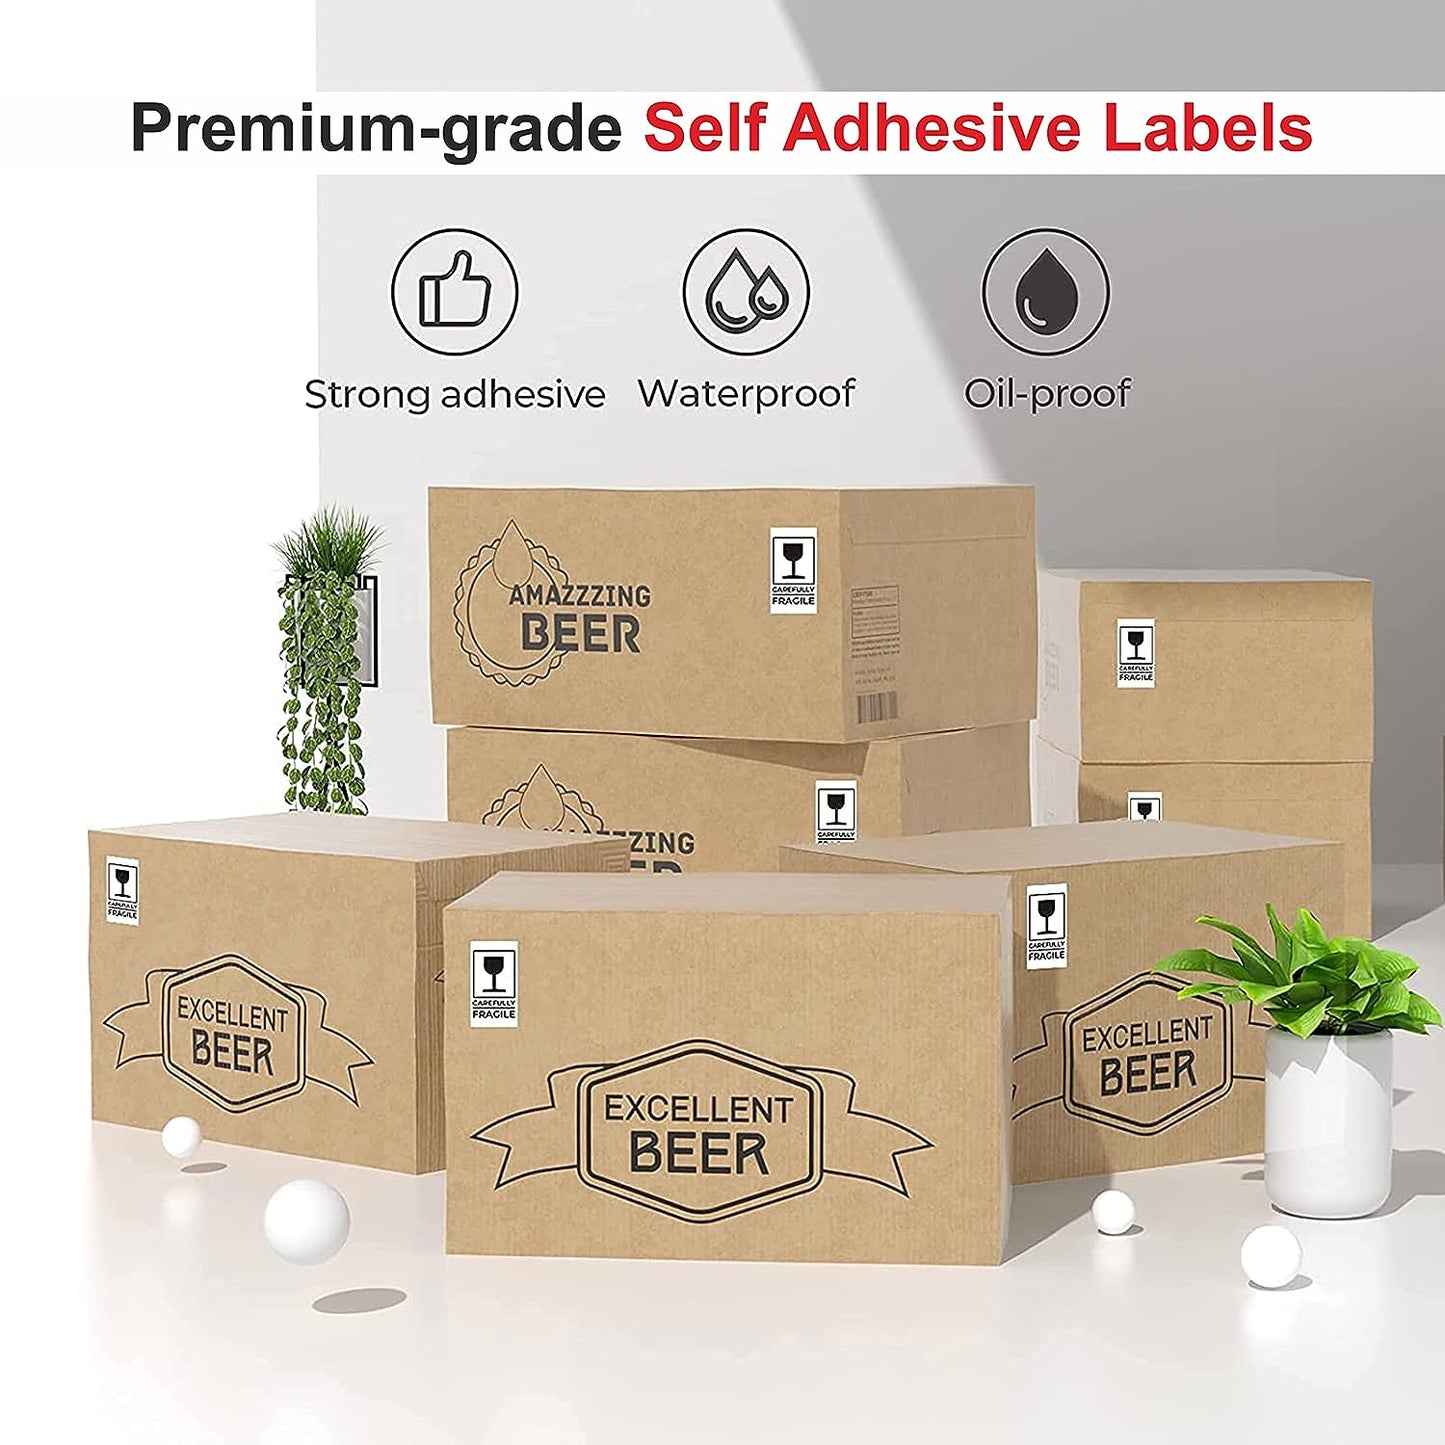 Oddy A4 Self Adhesive Paper Label Stickers for Laser & Inkjet Printers - 8 Labels per Sheet - Pack of 100 Sheets, for Shipping, Address, Folders, Industrial use